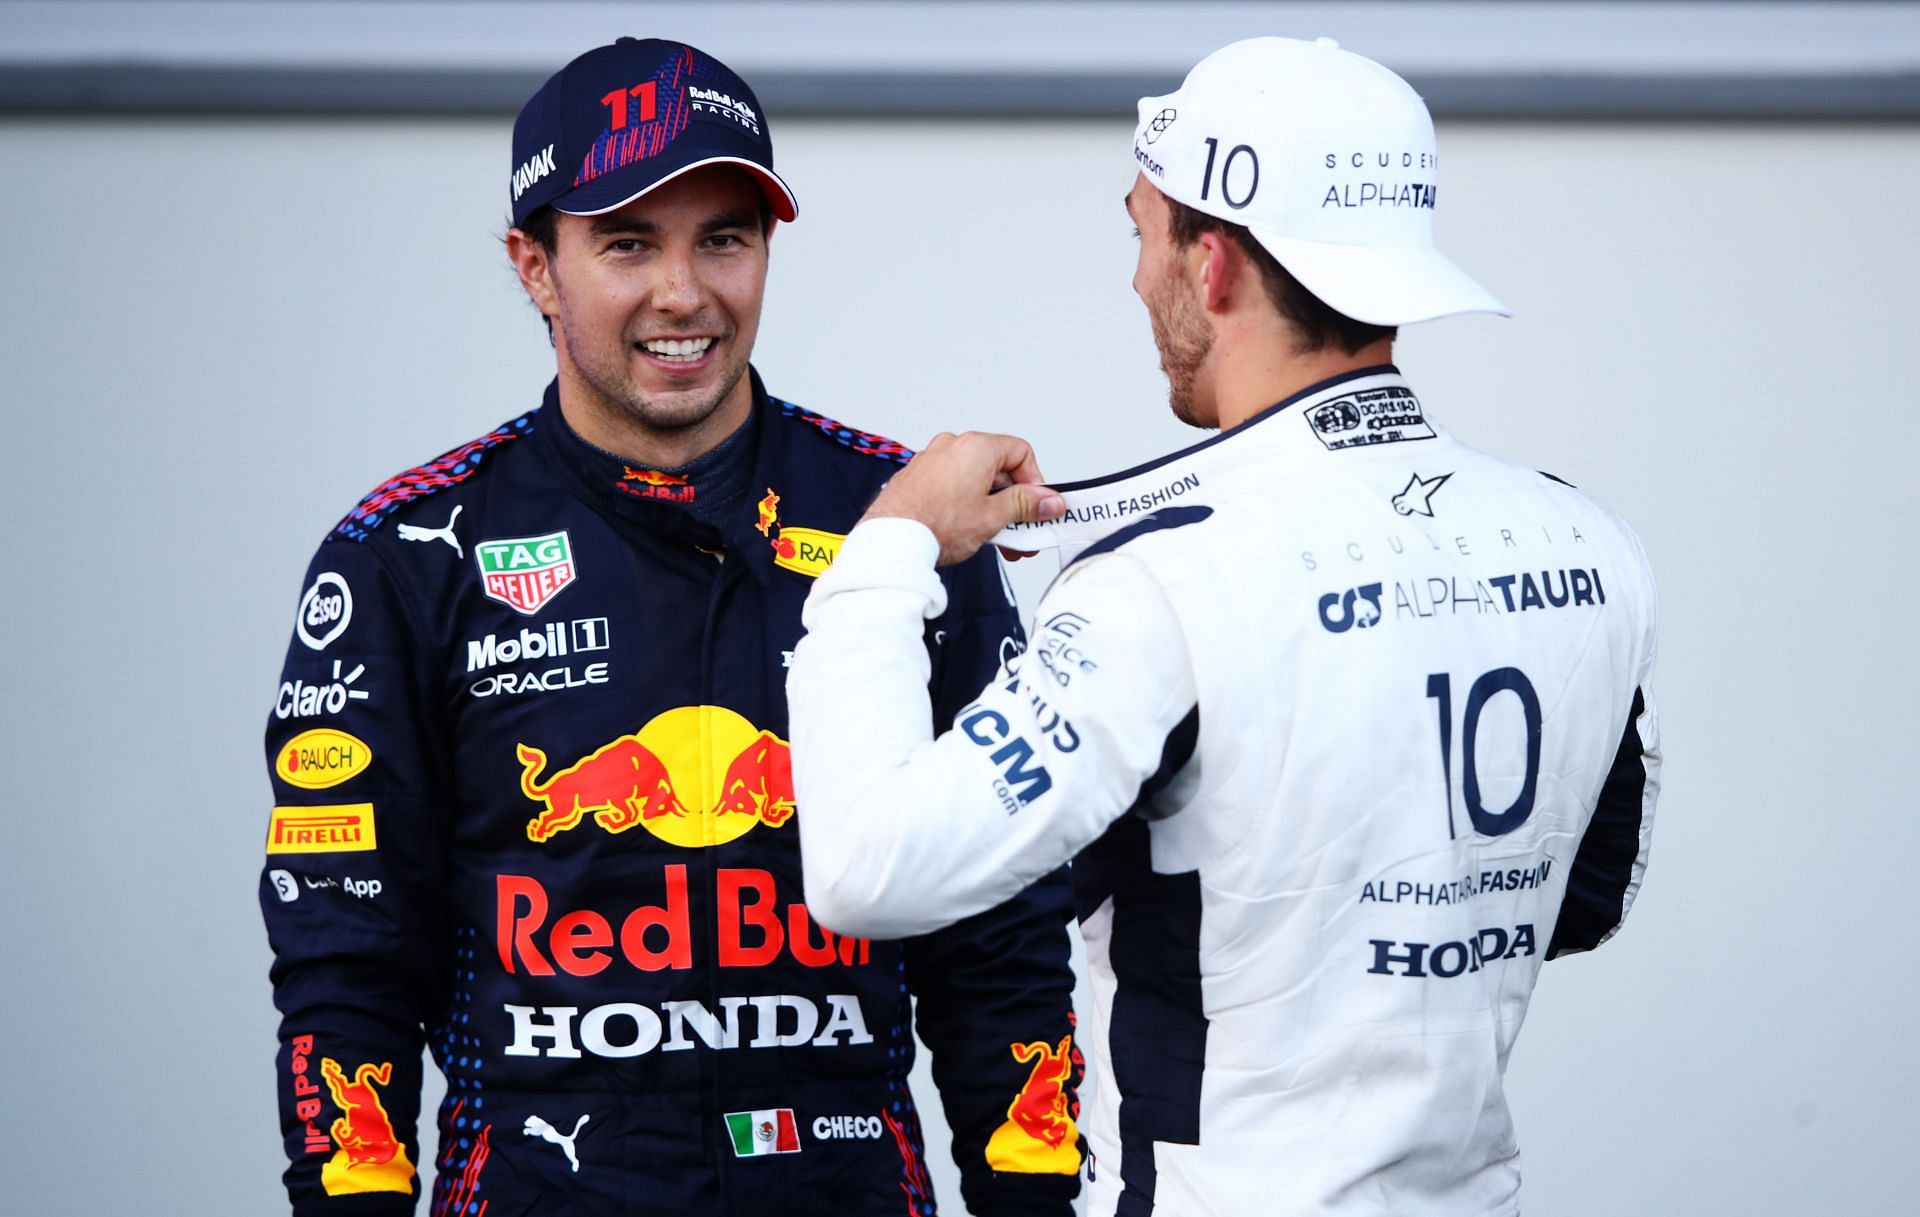 Sergio Perez and Pierre Gasly are both currently in the running for a seat alongside Max Verstappen in 2023